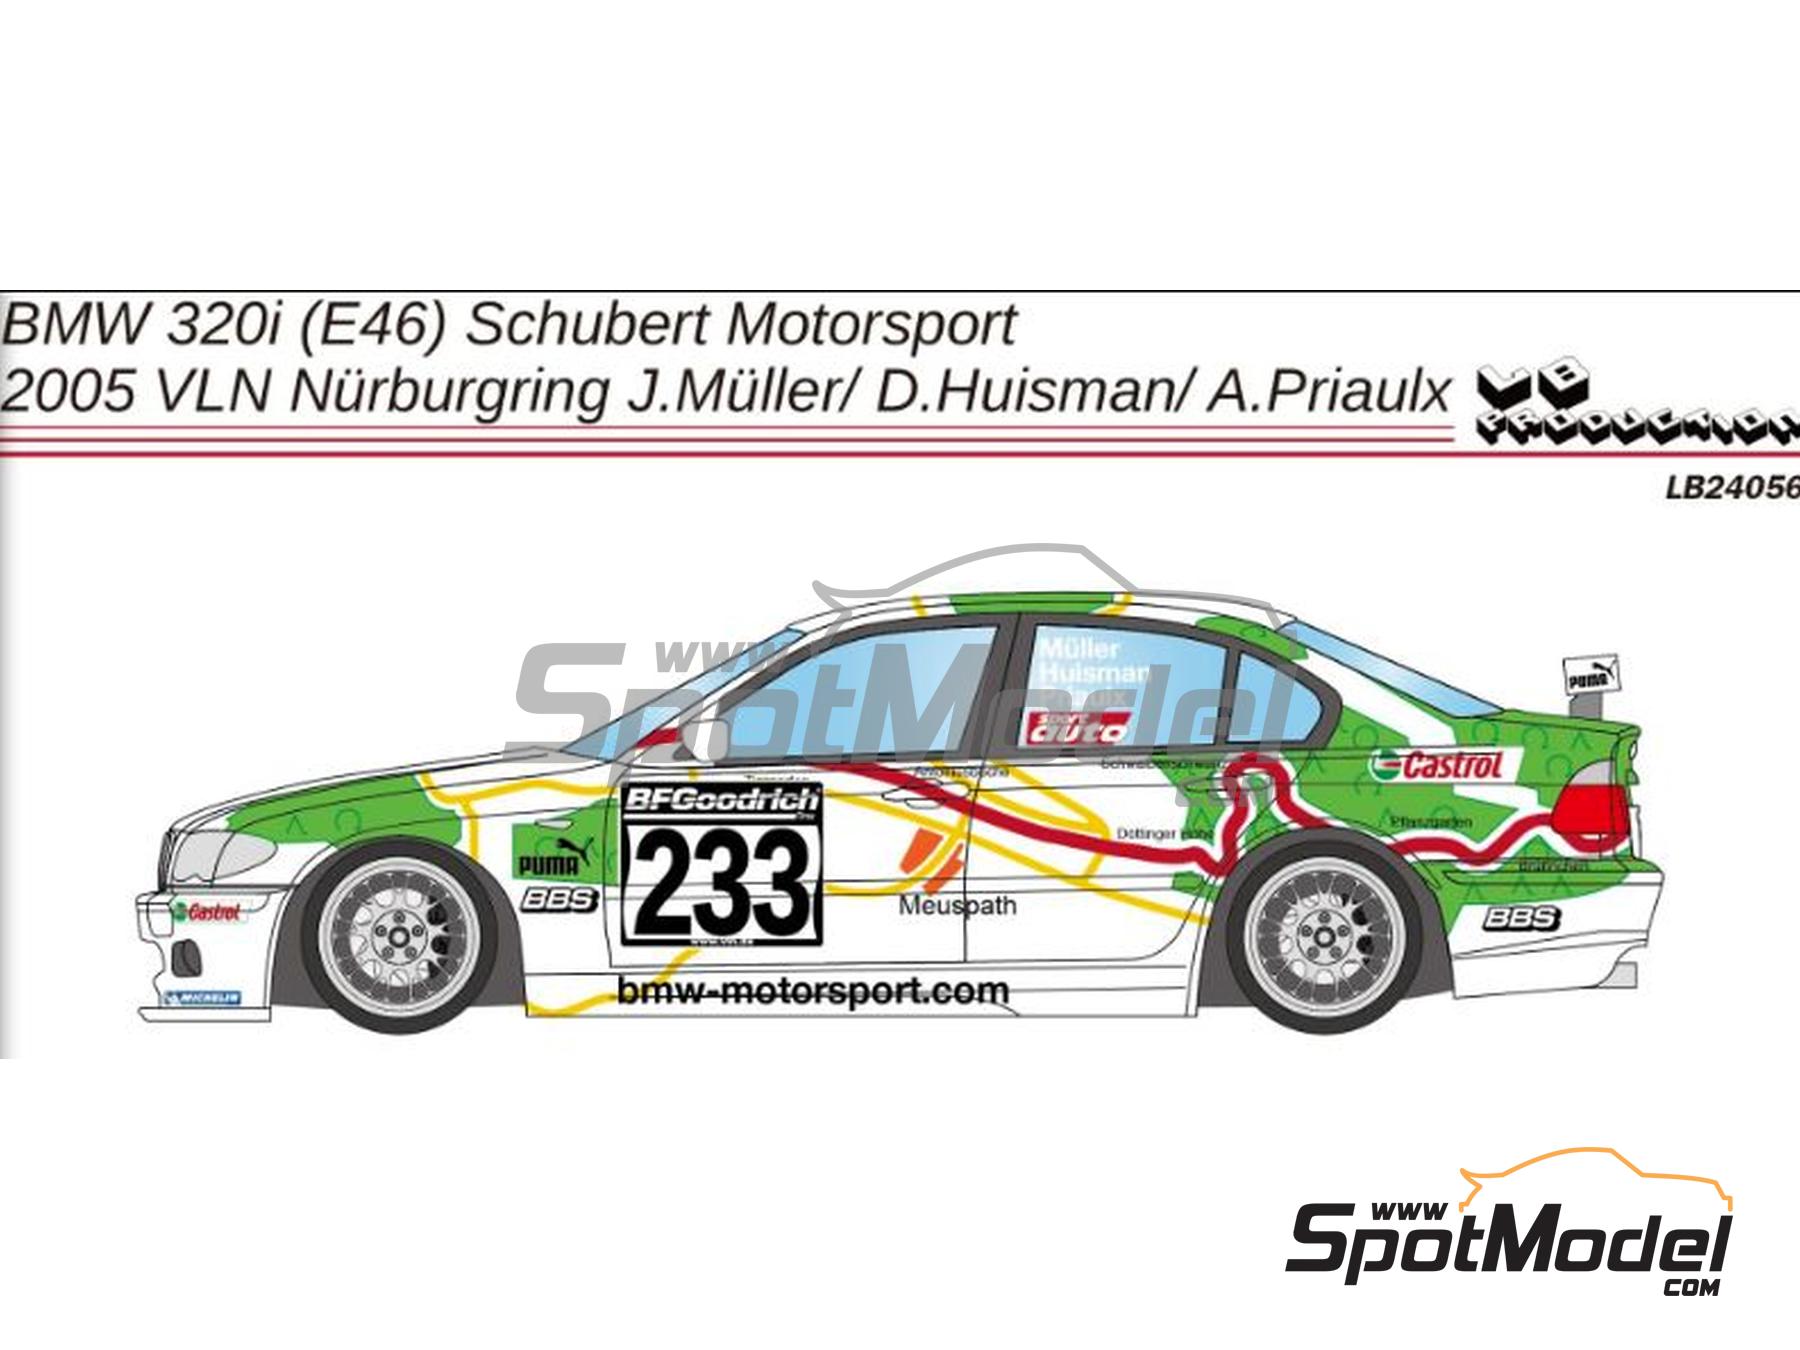 BMW 320i (E46) Schubert Motorsport Team - VLN Nürburgring Endurance Series  2005. Marking / livery in 1/24 scale manufactured by LB Production (ref. LB